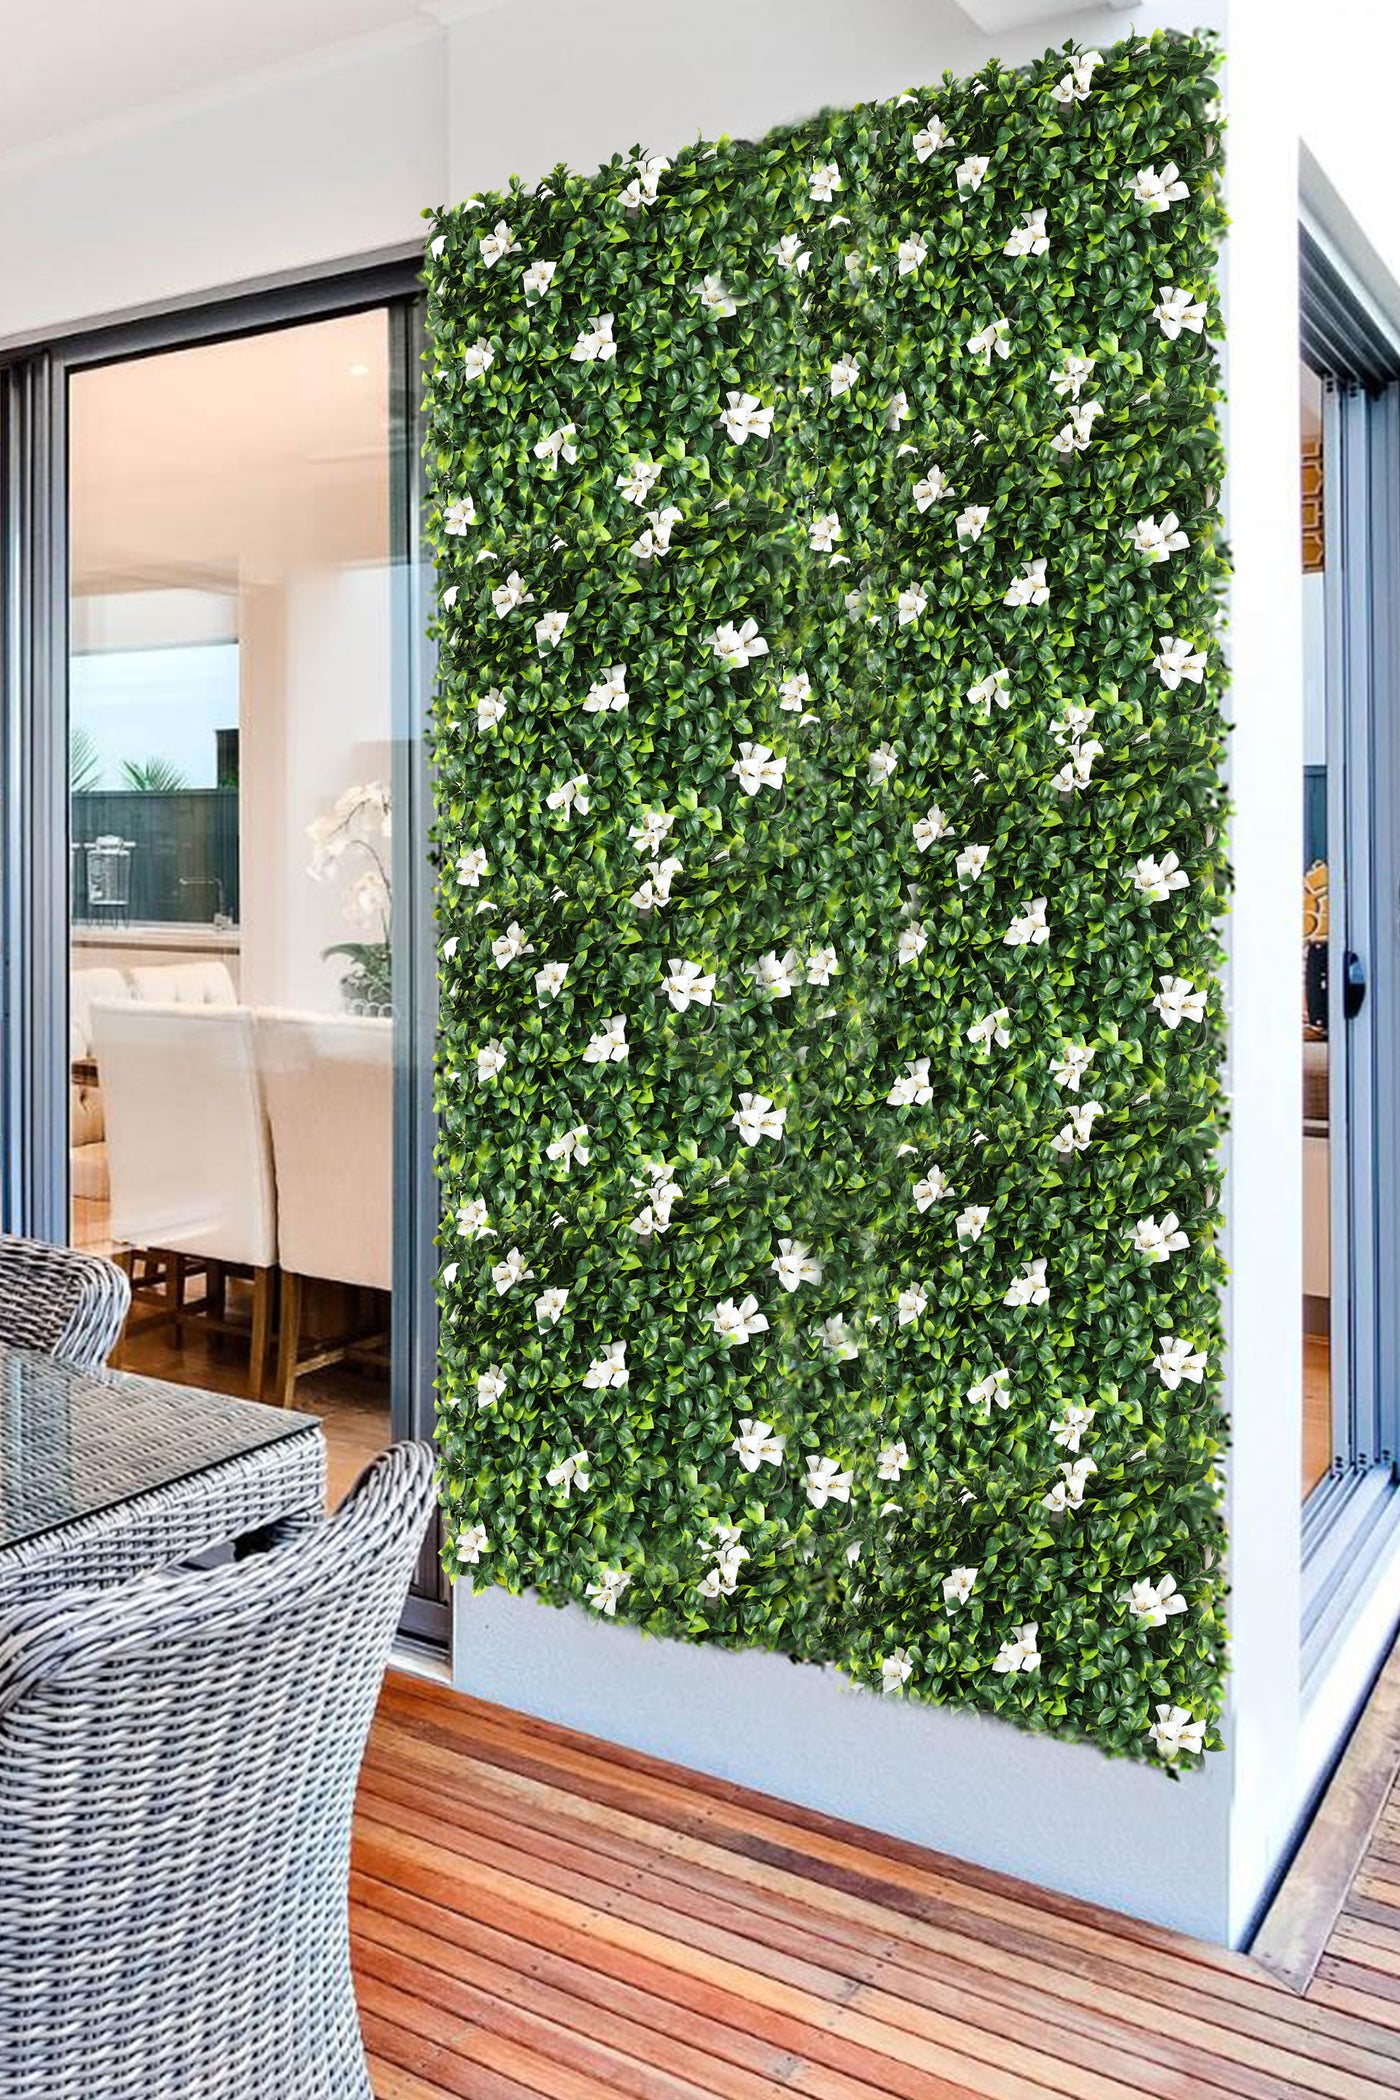 Blossom White Flowers With Long Lush Green Leaves Artificial Vertical Garden Wall Tile (Pack of 1)